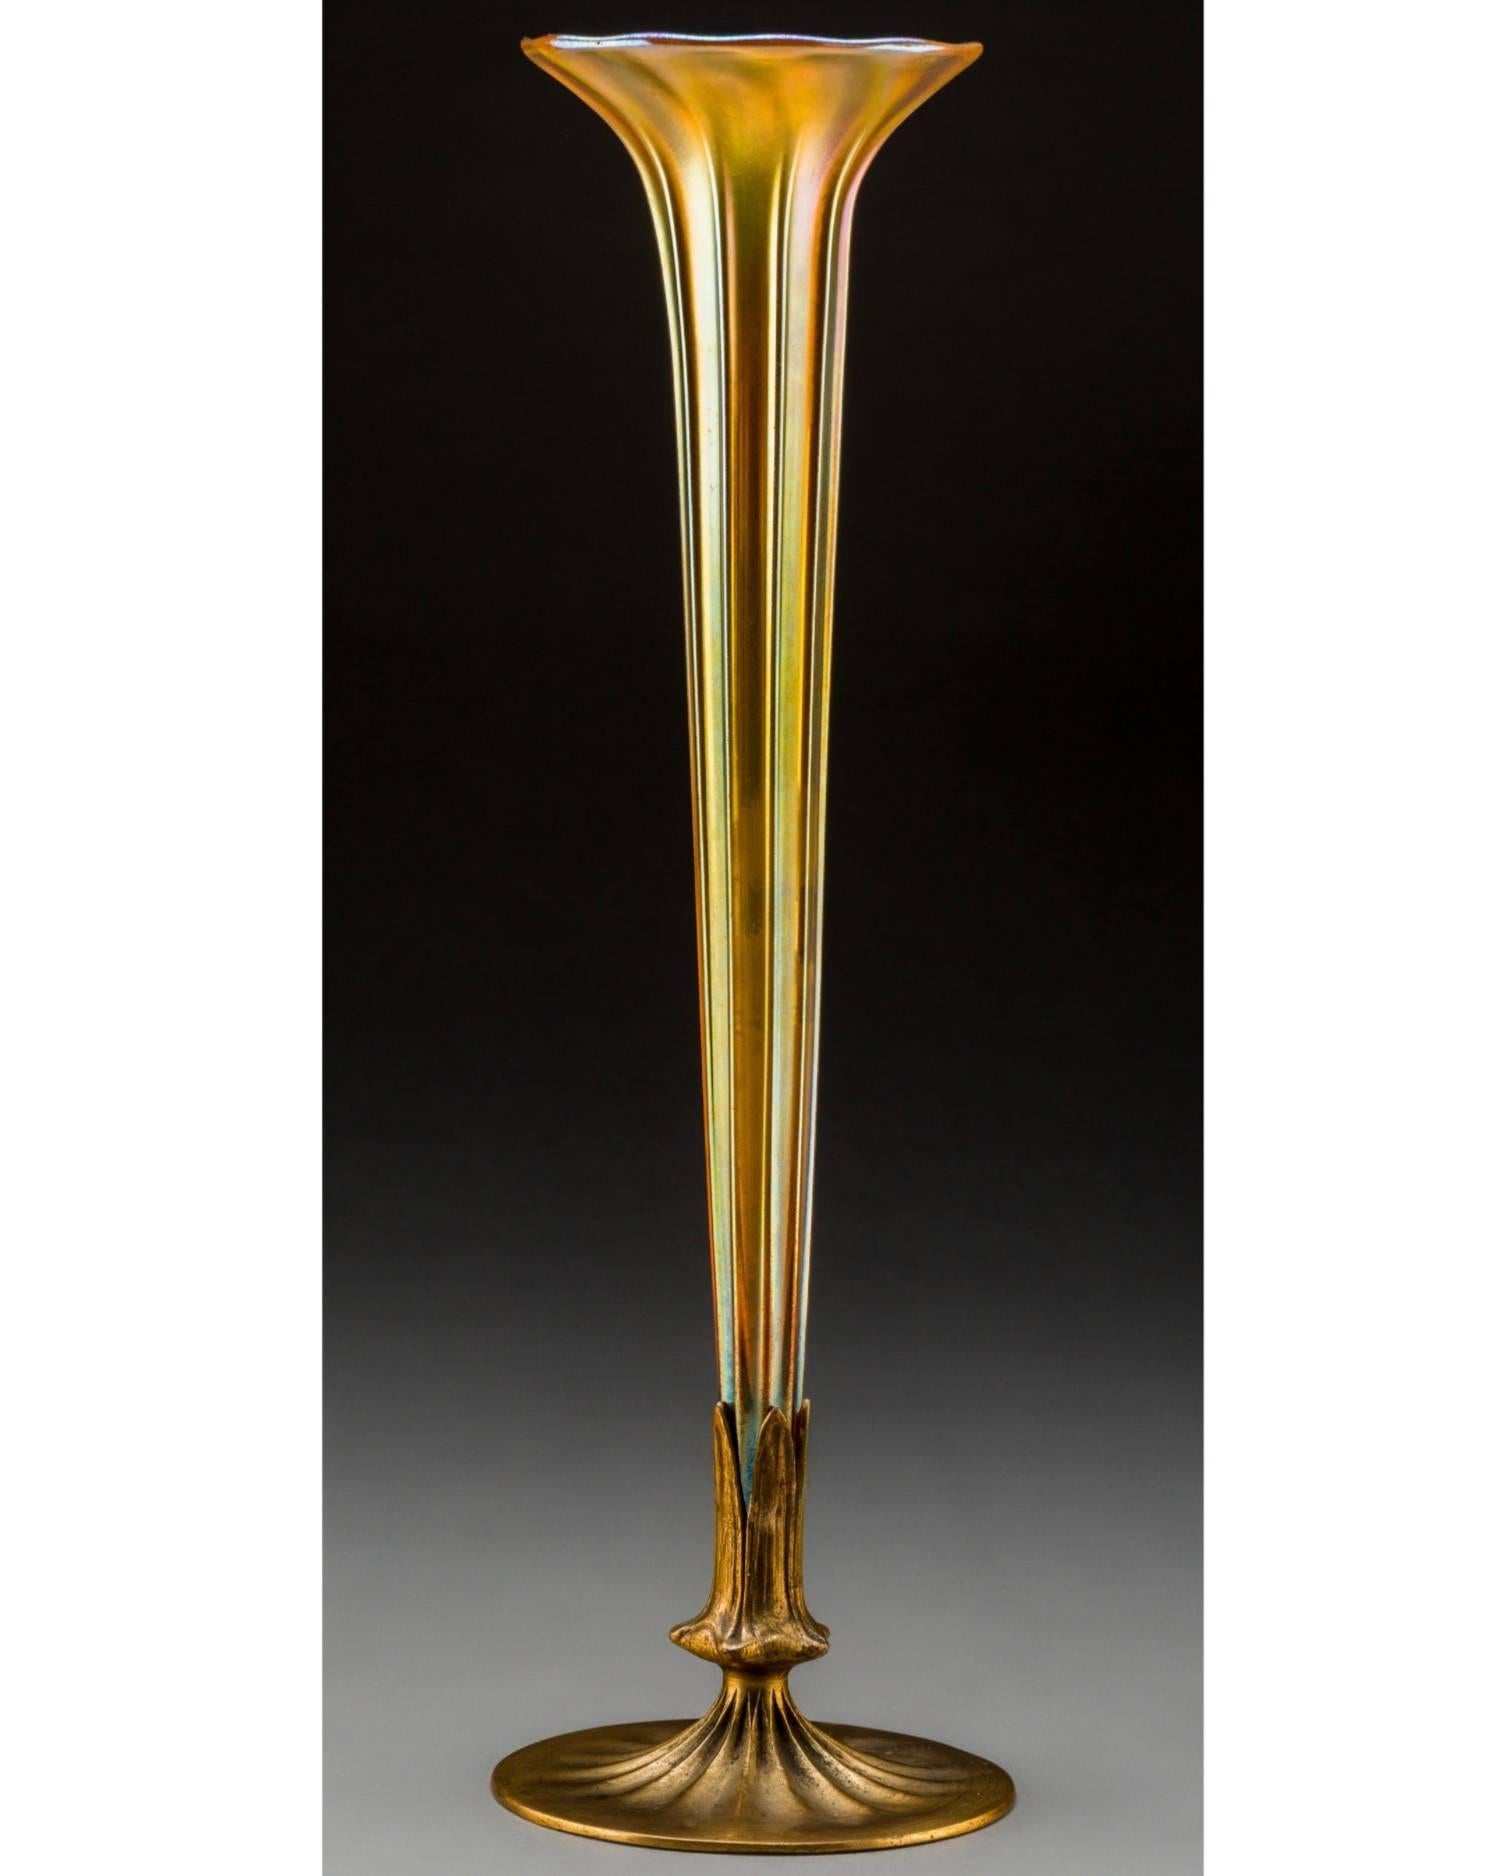 A Tiffany furnaces gold favrile glass and gilt bronze trumpet vase. Favrile glass is ribbed with iridescence, circa 1920-1928. 

Base stamped LOUIS C. TIFFANY FURNACES, INC., 158, with logotype; Glass engraved L.C.T., Favrile. 

Condition: Excellent